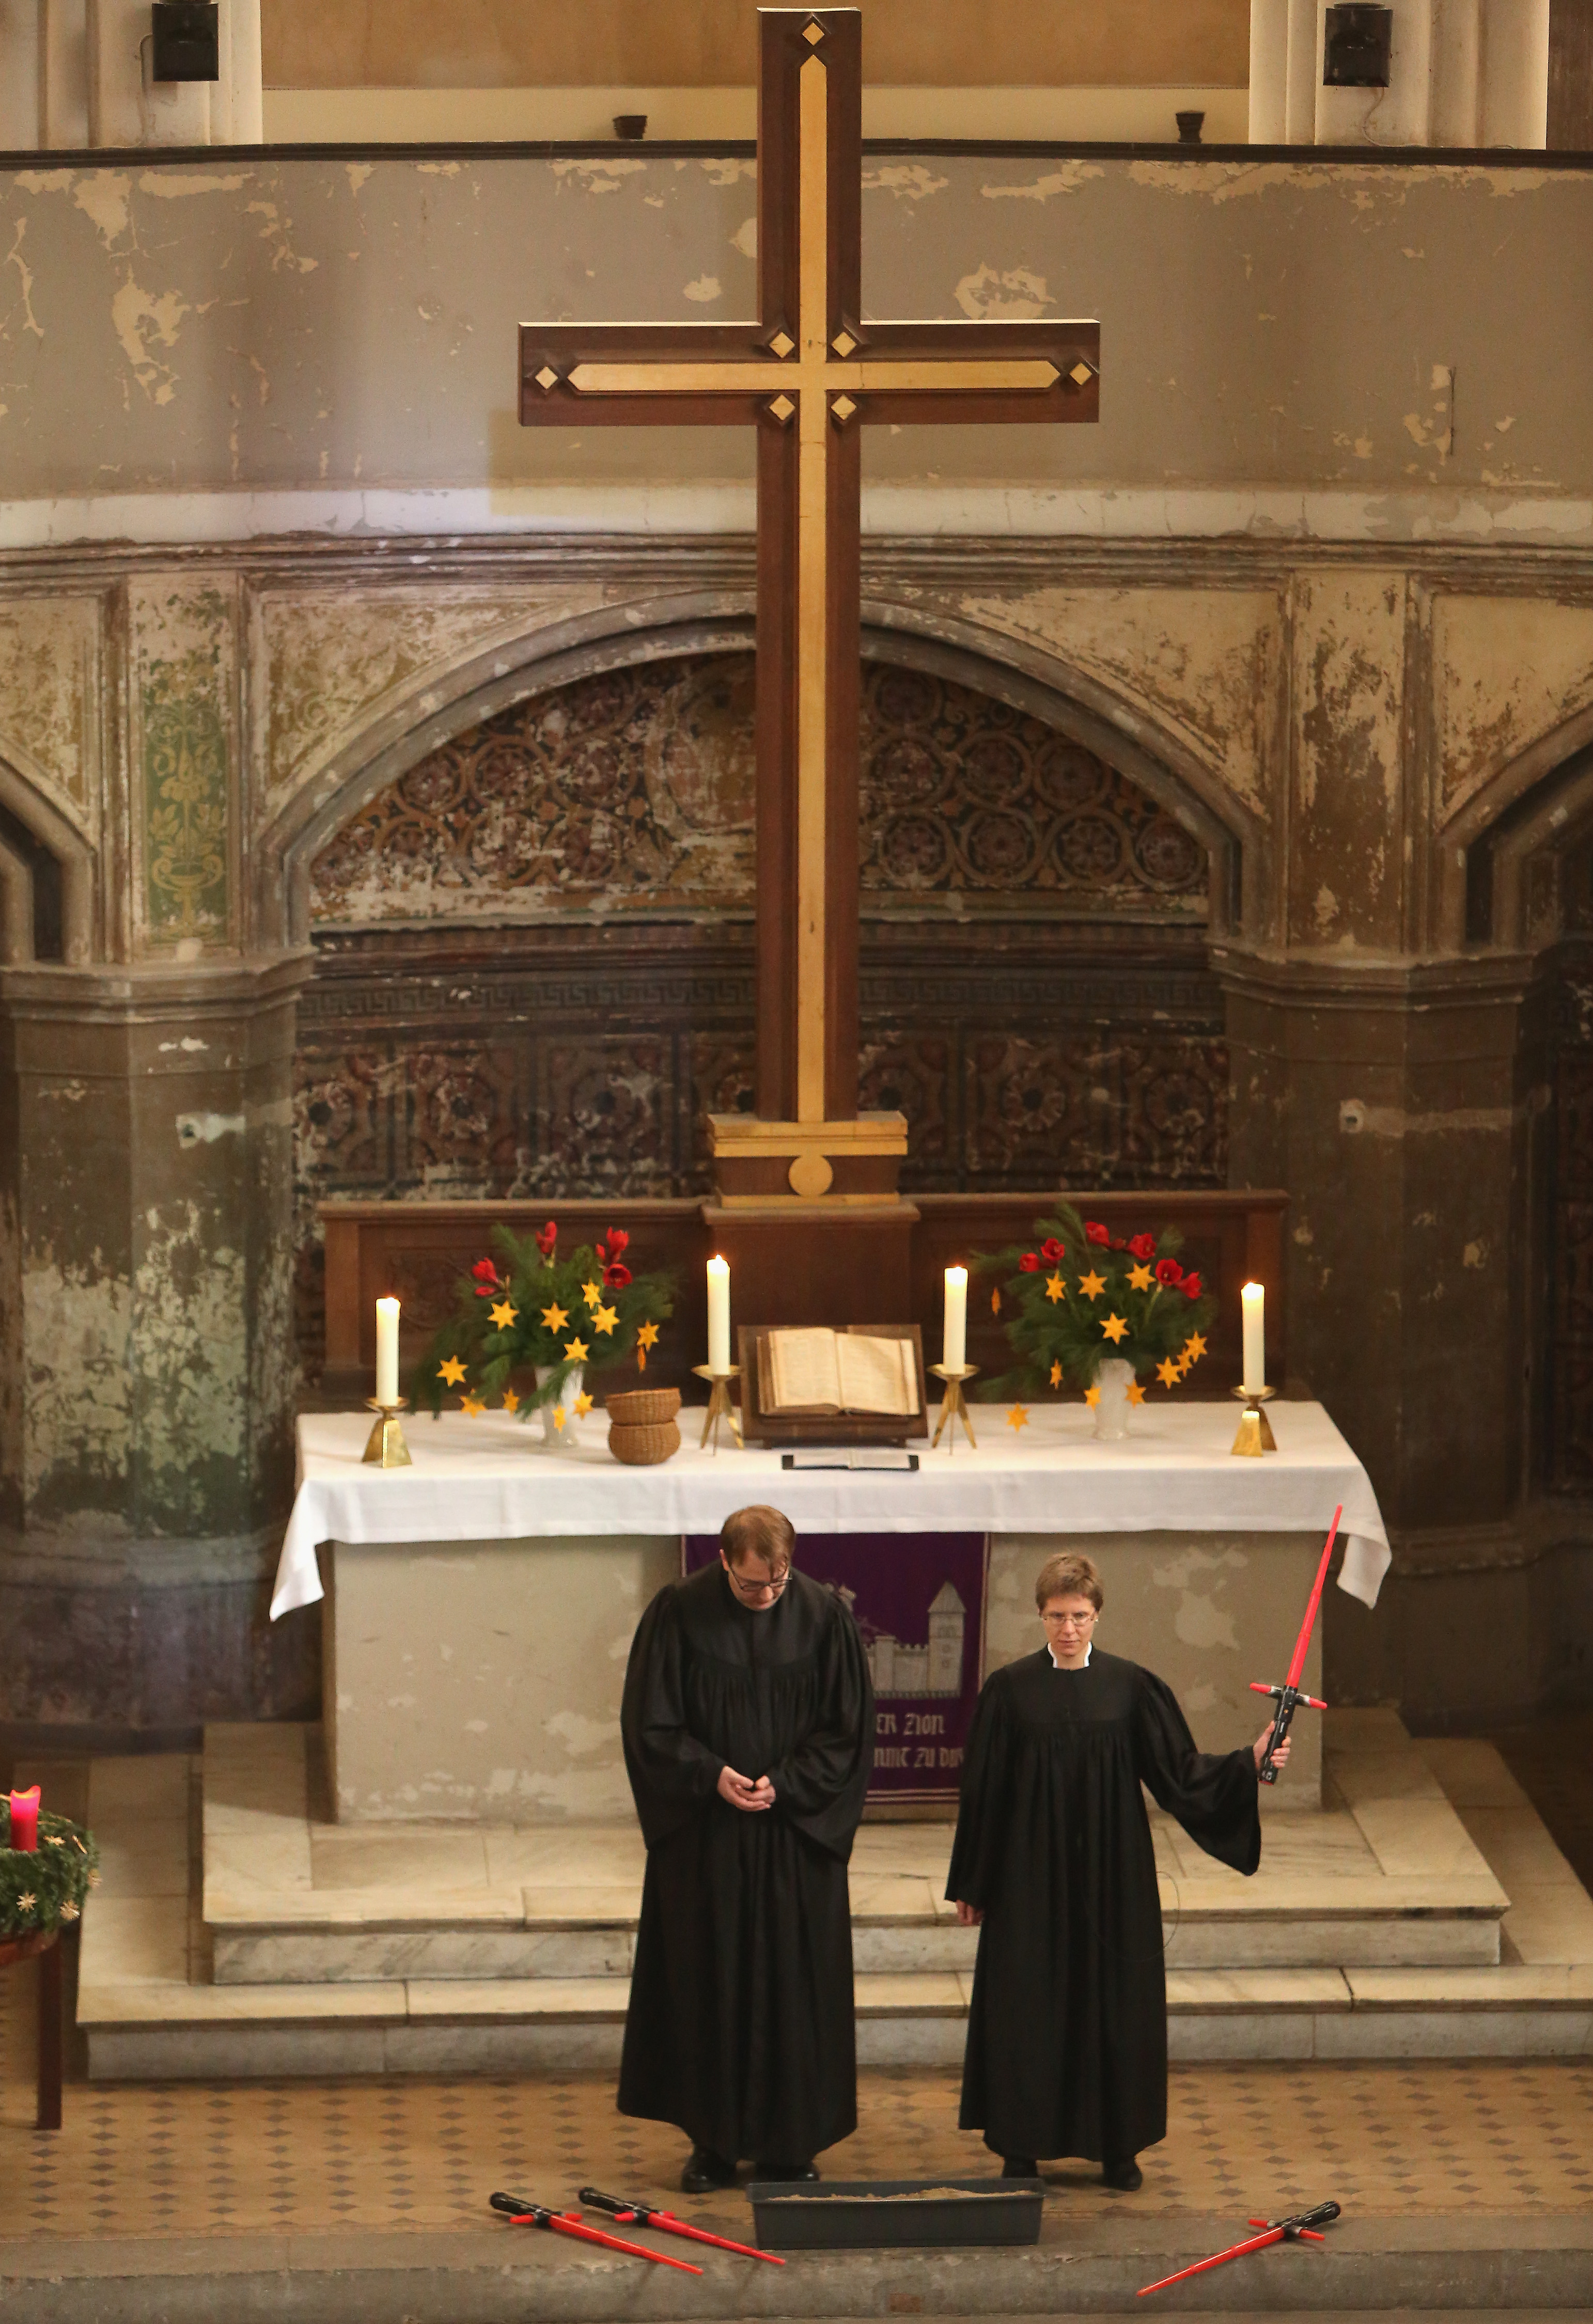 BERLIN, GERMANY - DECEMBER 20:  Vicars Lucas Ludewig (L) and Ulrike Garve hold a church service centered around the 1983 film 'Star Wars Episode VI: Return of the Jedi' at the Zionskirche (Zion Church) on December 20, 2015 in Berlin, Germany. The latest Star Wars film, 'Star Wars Episode VII: The Force Awakens,' was released in the country two days earlier, and local priests used the opportunity to tie Biblical parallels concerning good and evil to the movie, while using the original film's score by John Williams as organ accompaniment, along with video clips.  (Photo by Adam Berry/Getty Images)